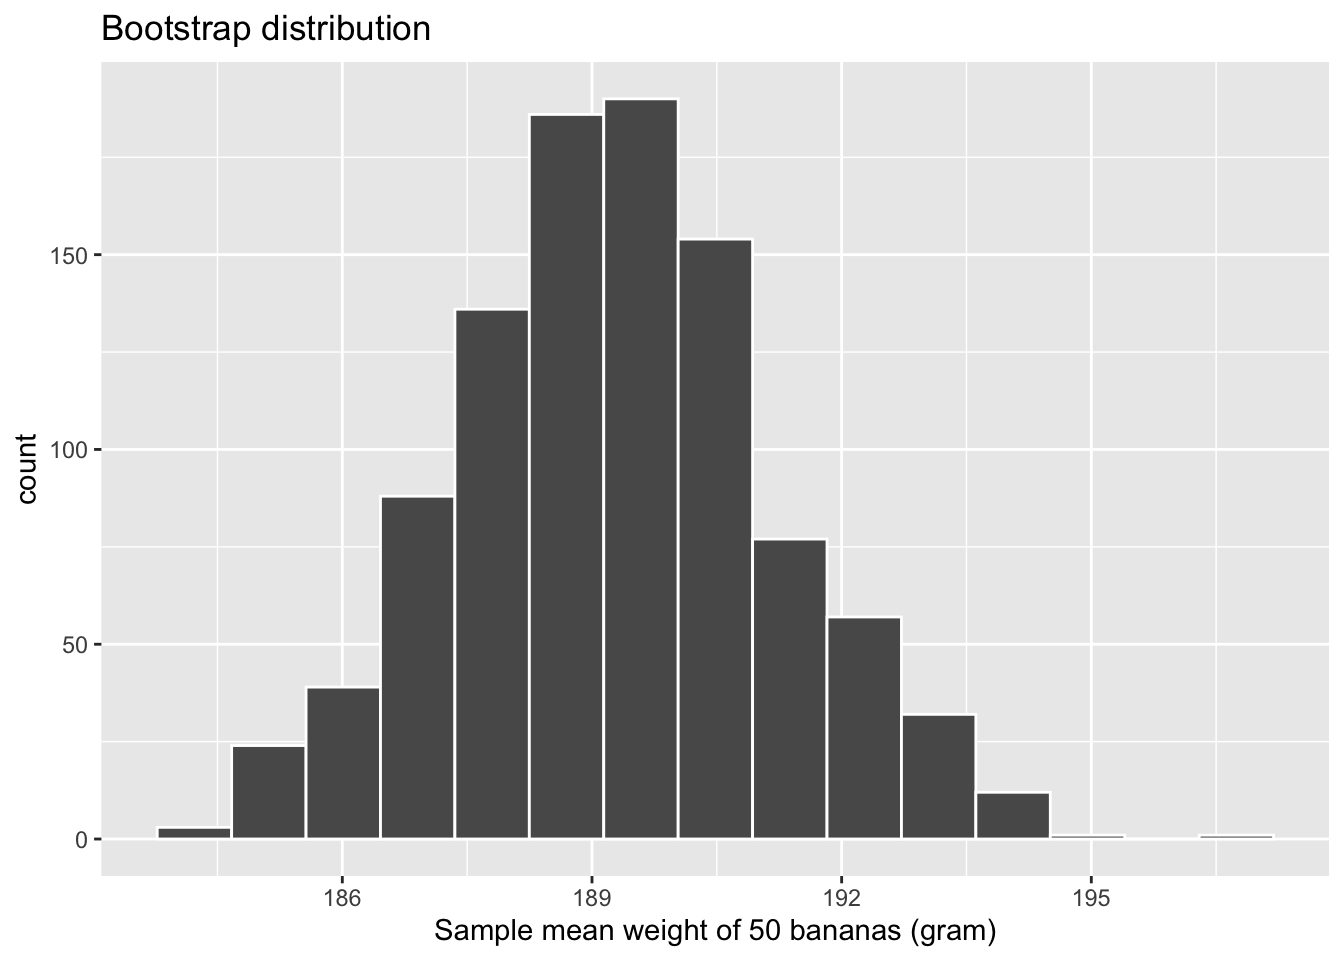 Bootstrap distribution of sample mean weight for $n = 1000$.